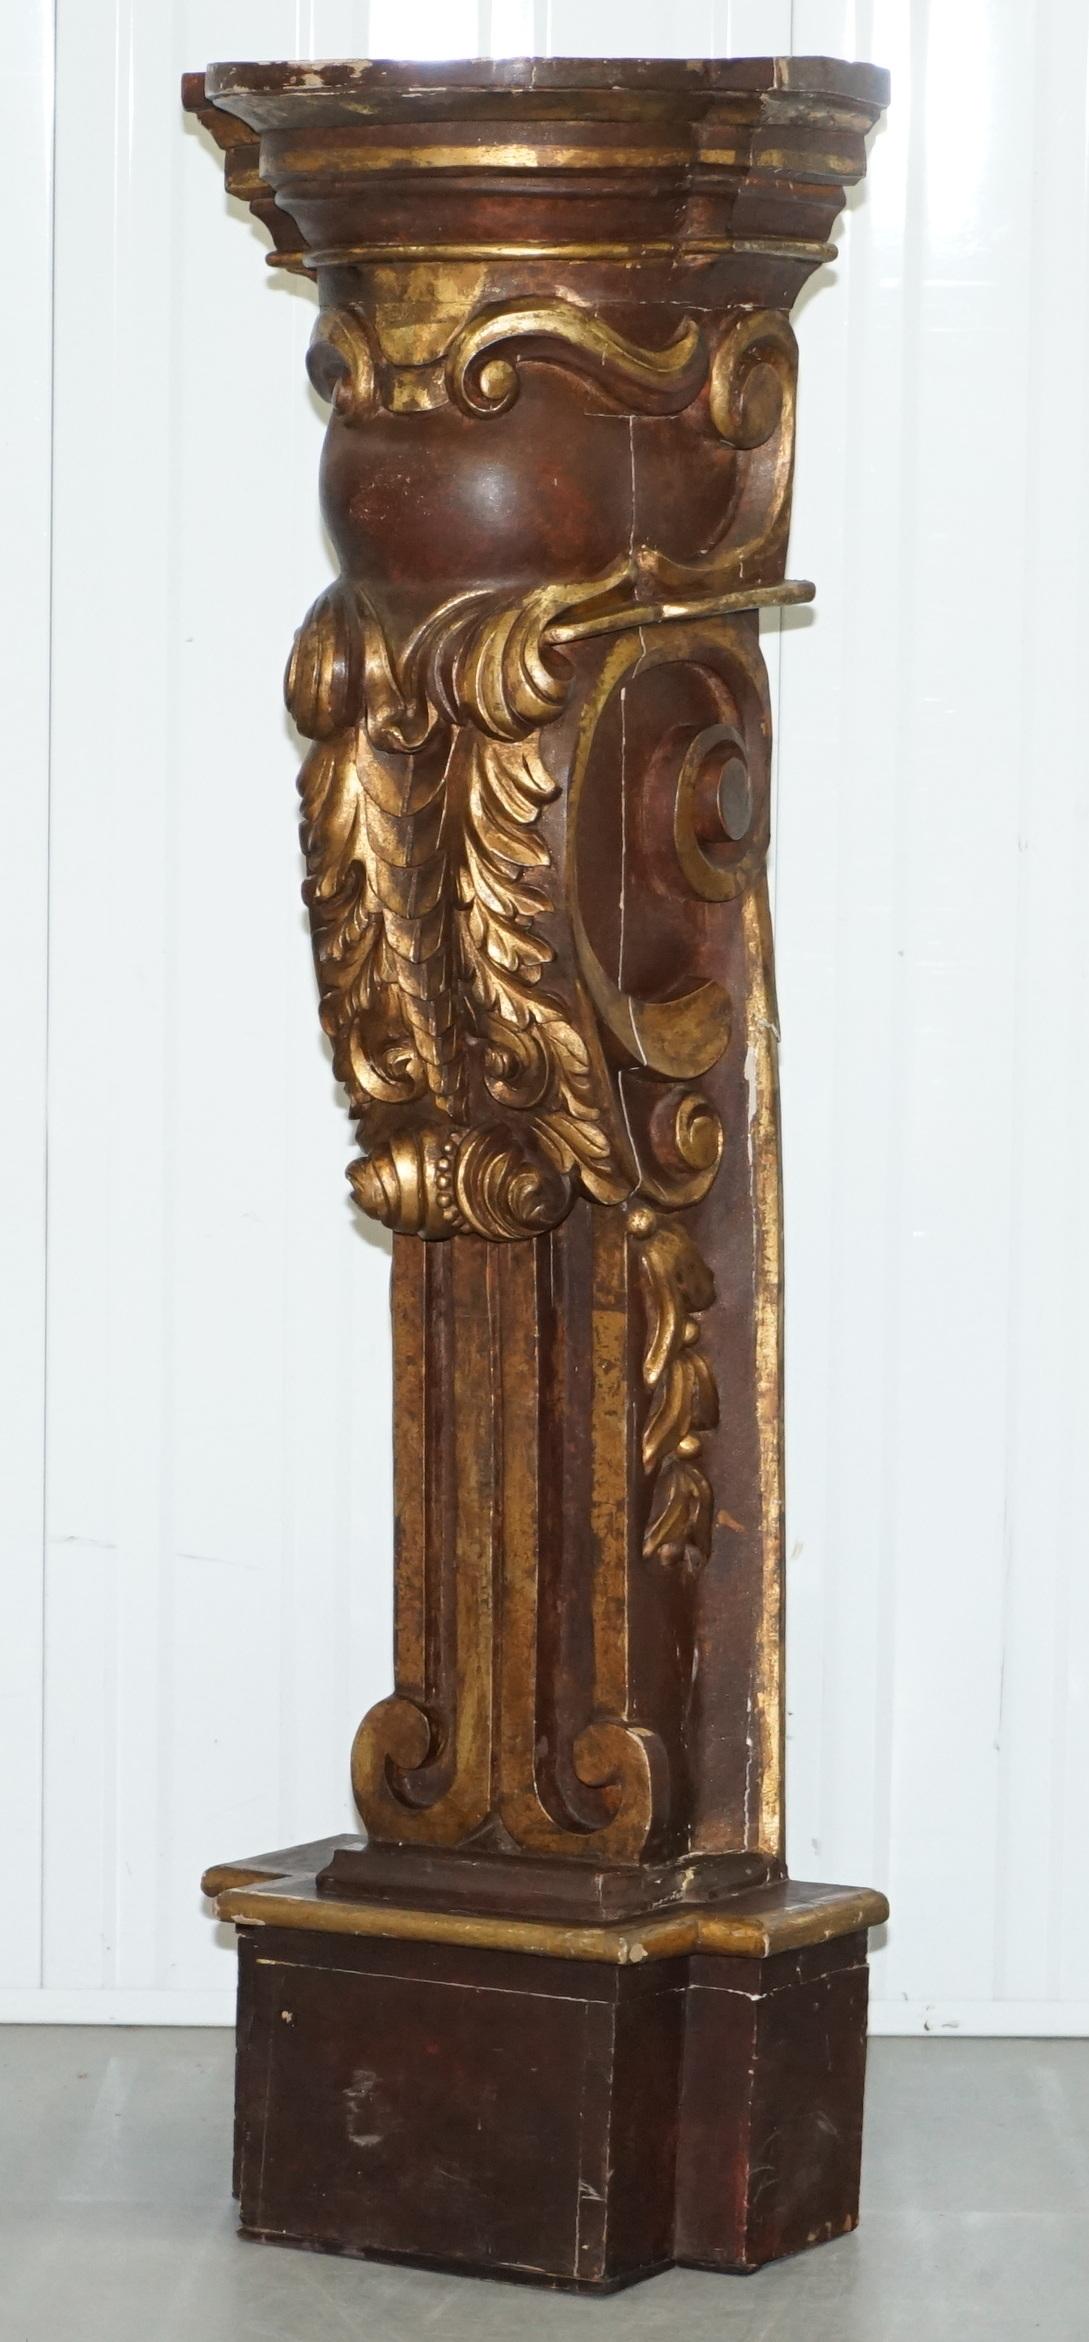 English Pair of Old Ship Style Pillars Column Pedestals Jardinière Stands Carved Wood